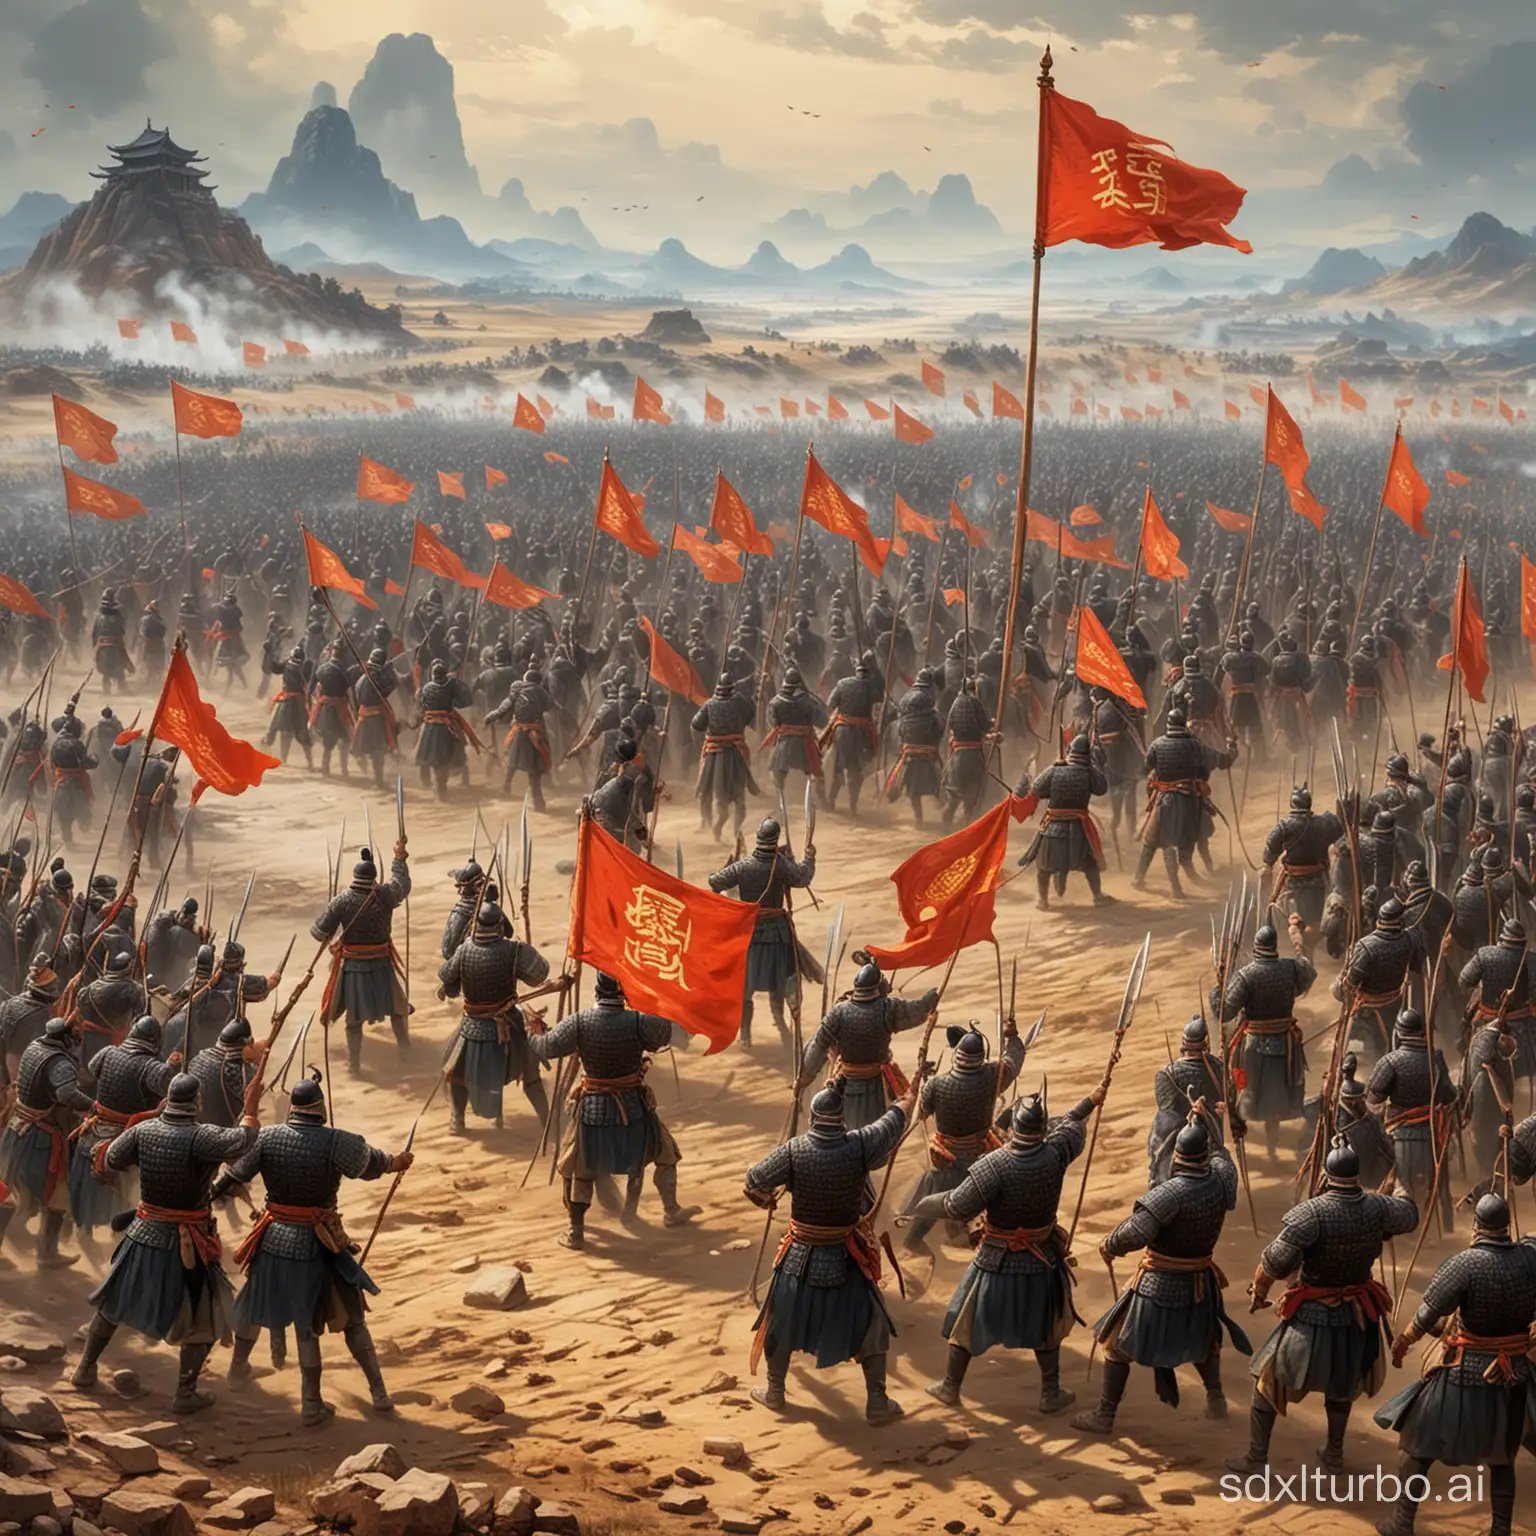 Ancient battlefield, Qin's infantry army, hoisting the flag of Qin